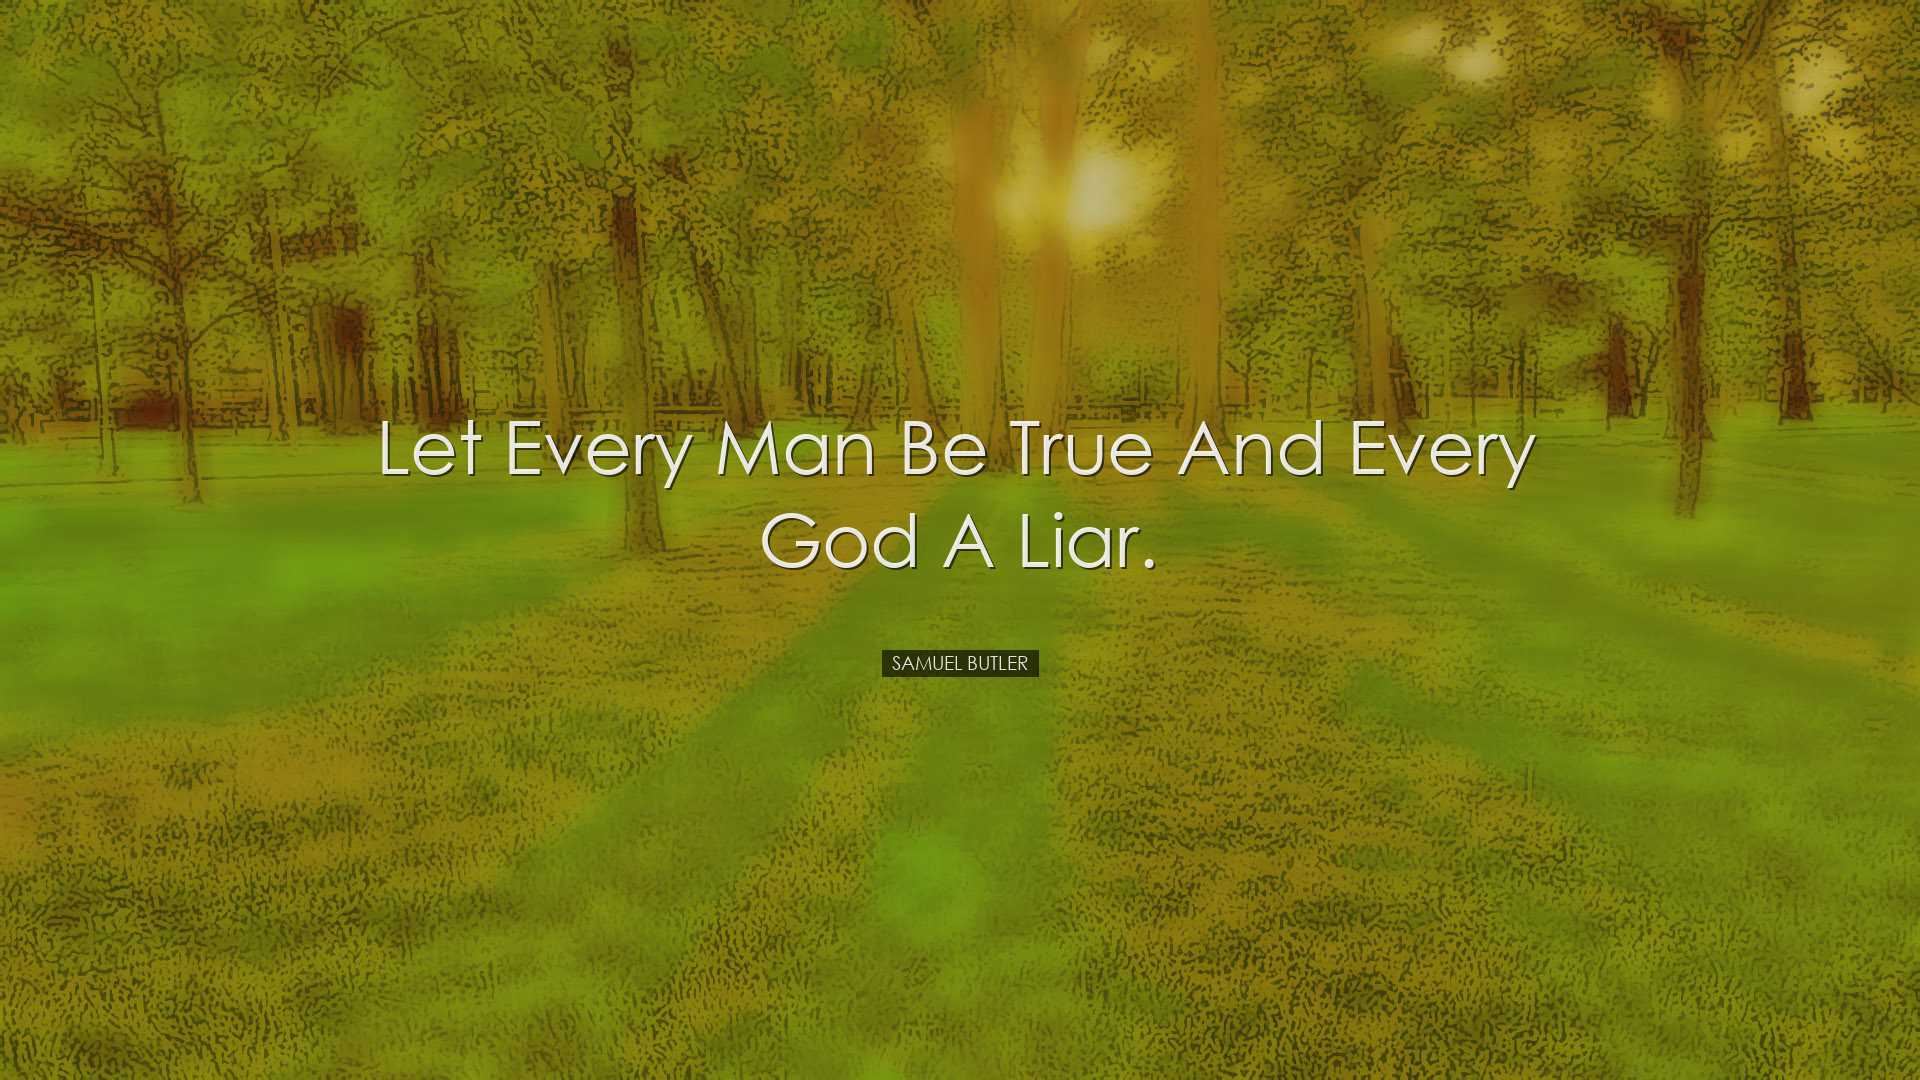 Let every man be true and every god a liar. - Samuel Butler